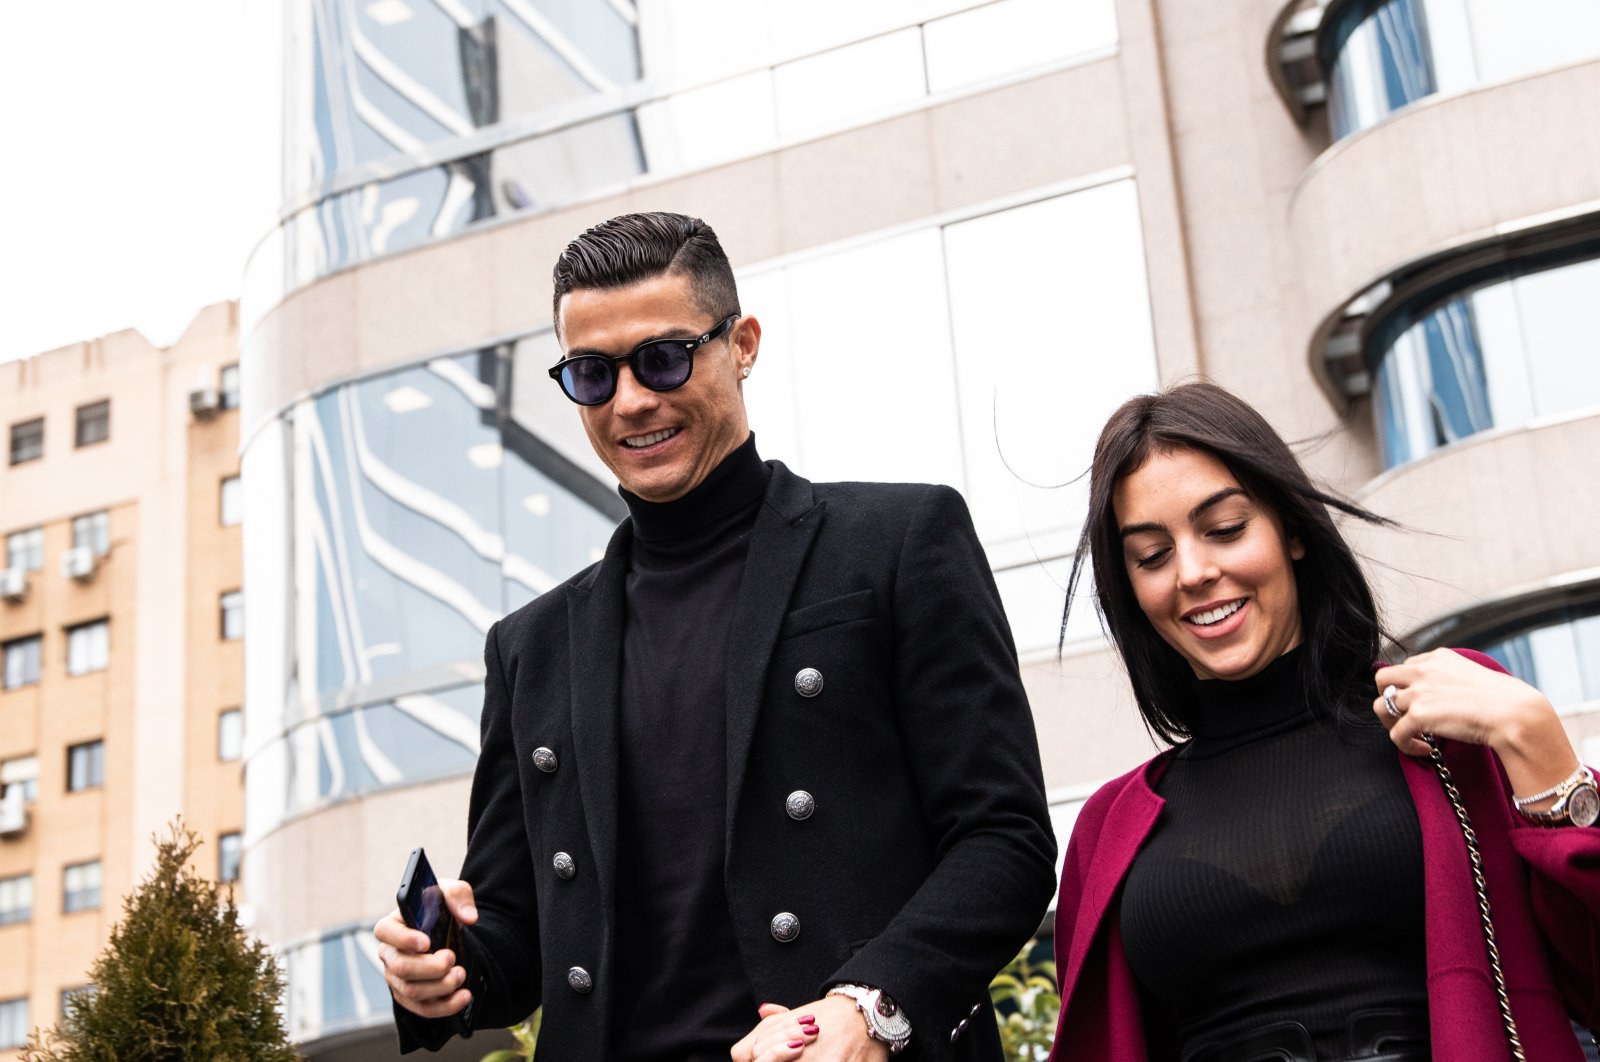 Portuguese player Cristiano Ronaldo leaves from the provincial court of Madrid with his girlfriend Georgina Rodriguez from his tax evasion trial, Madrid, Spain, Jan. 22, 2019. (Getty Images Photo)